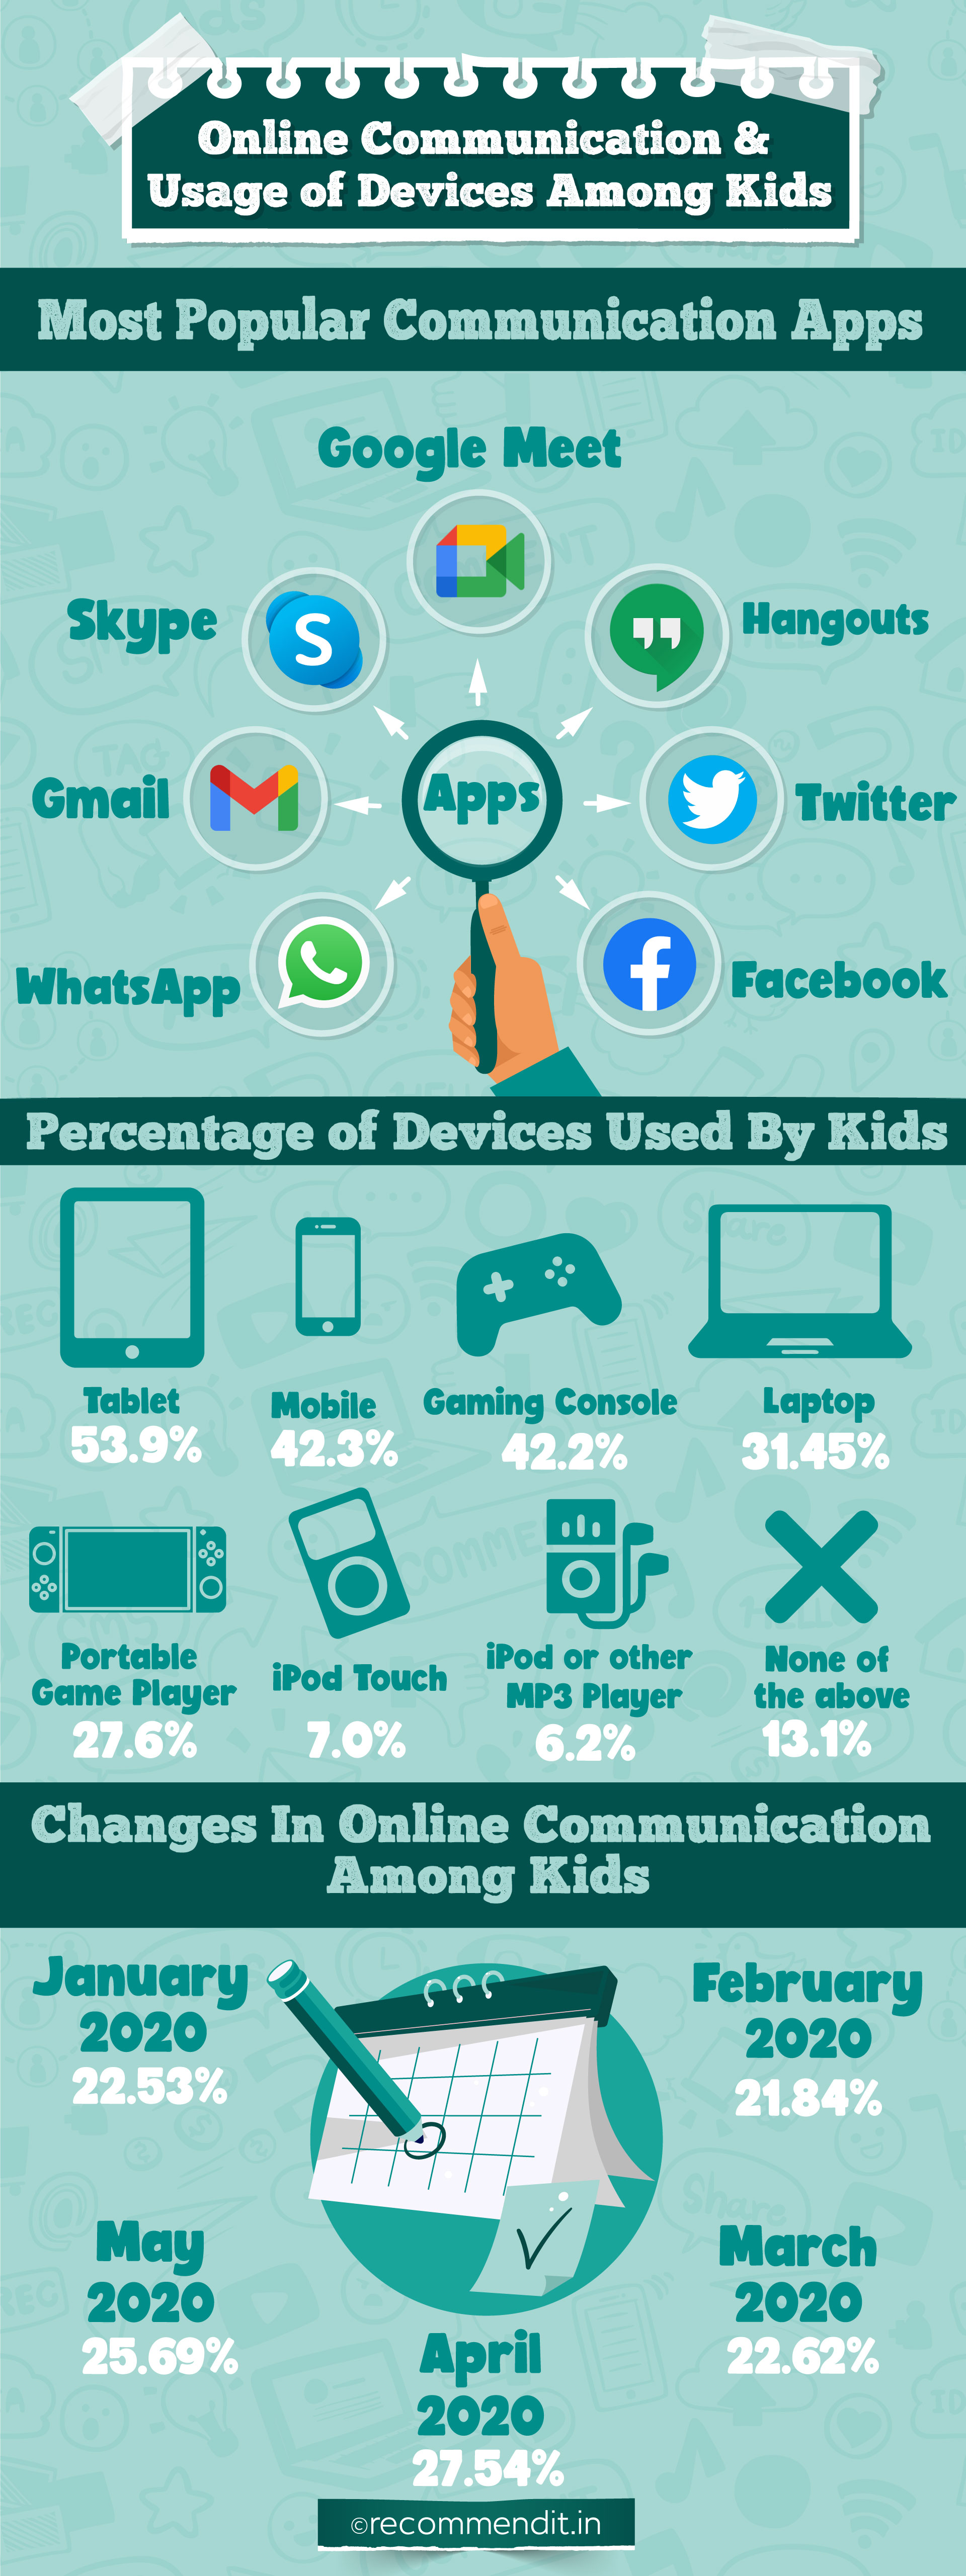 Online communication & usage of devices among kids